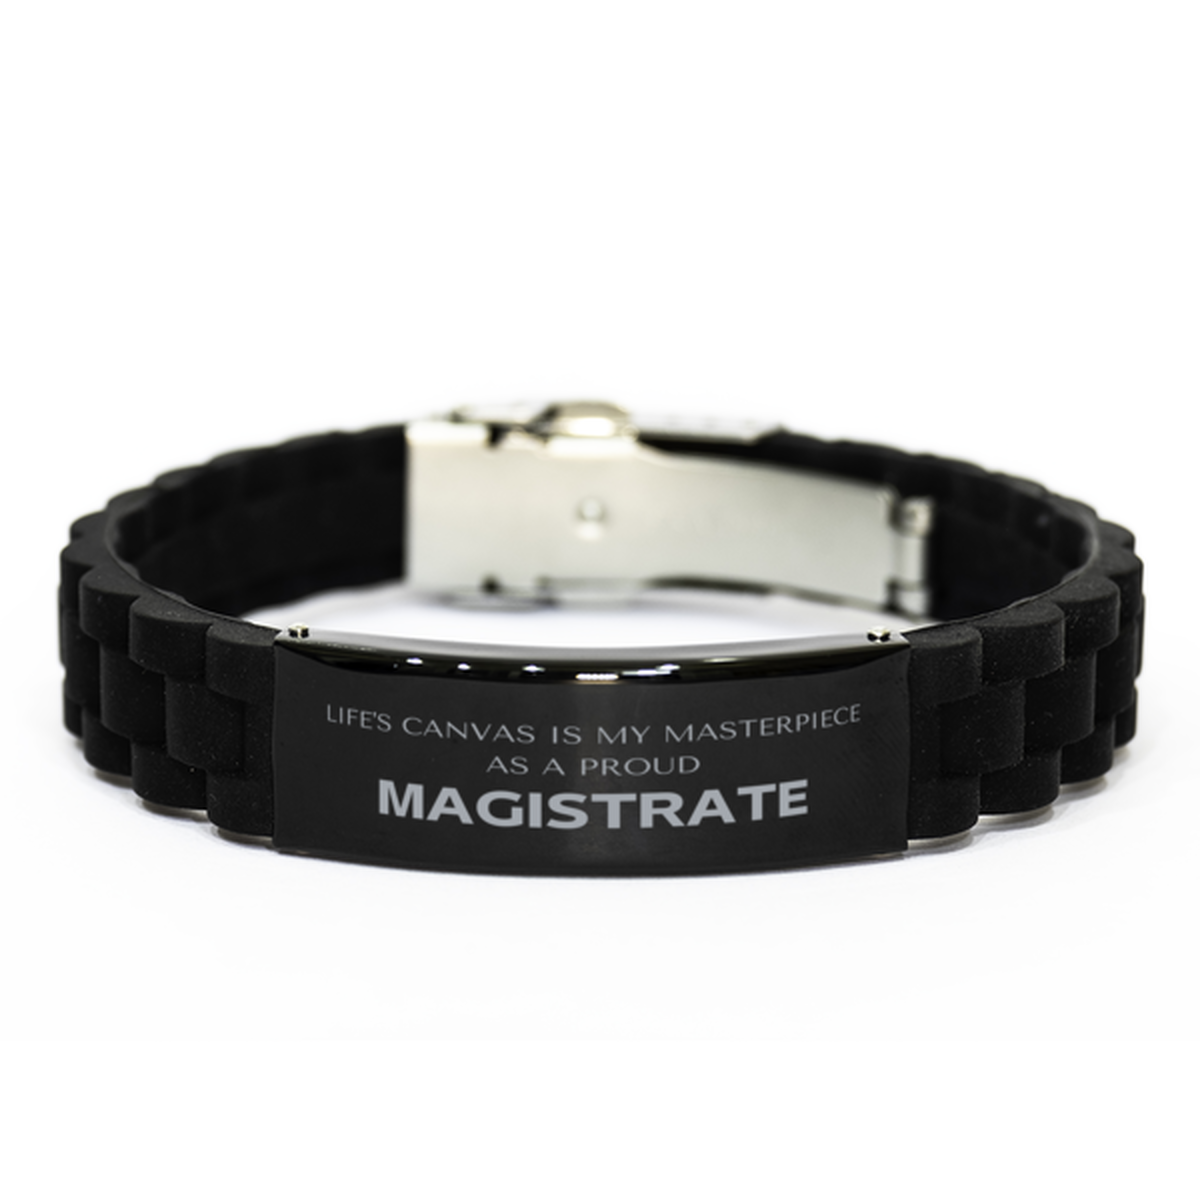 Proud Magistrate Gifts, Life's canvas is my masterpiece, Epic Birthday Christmas Unique Black Glidelock Clasp Bracelet For Magistrate, Coworkers, Men, Women, Friends